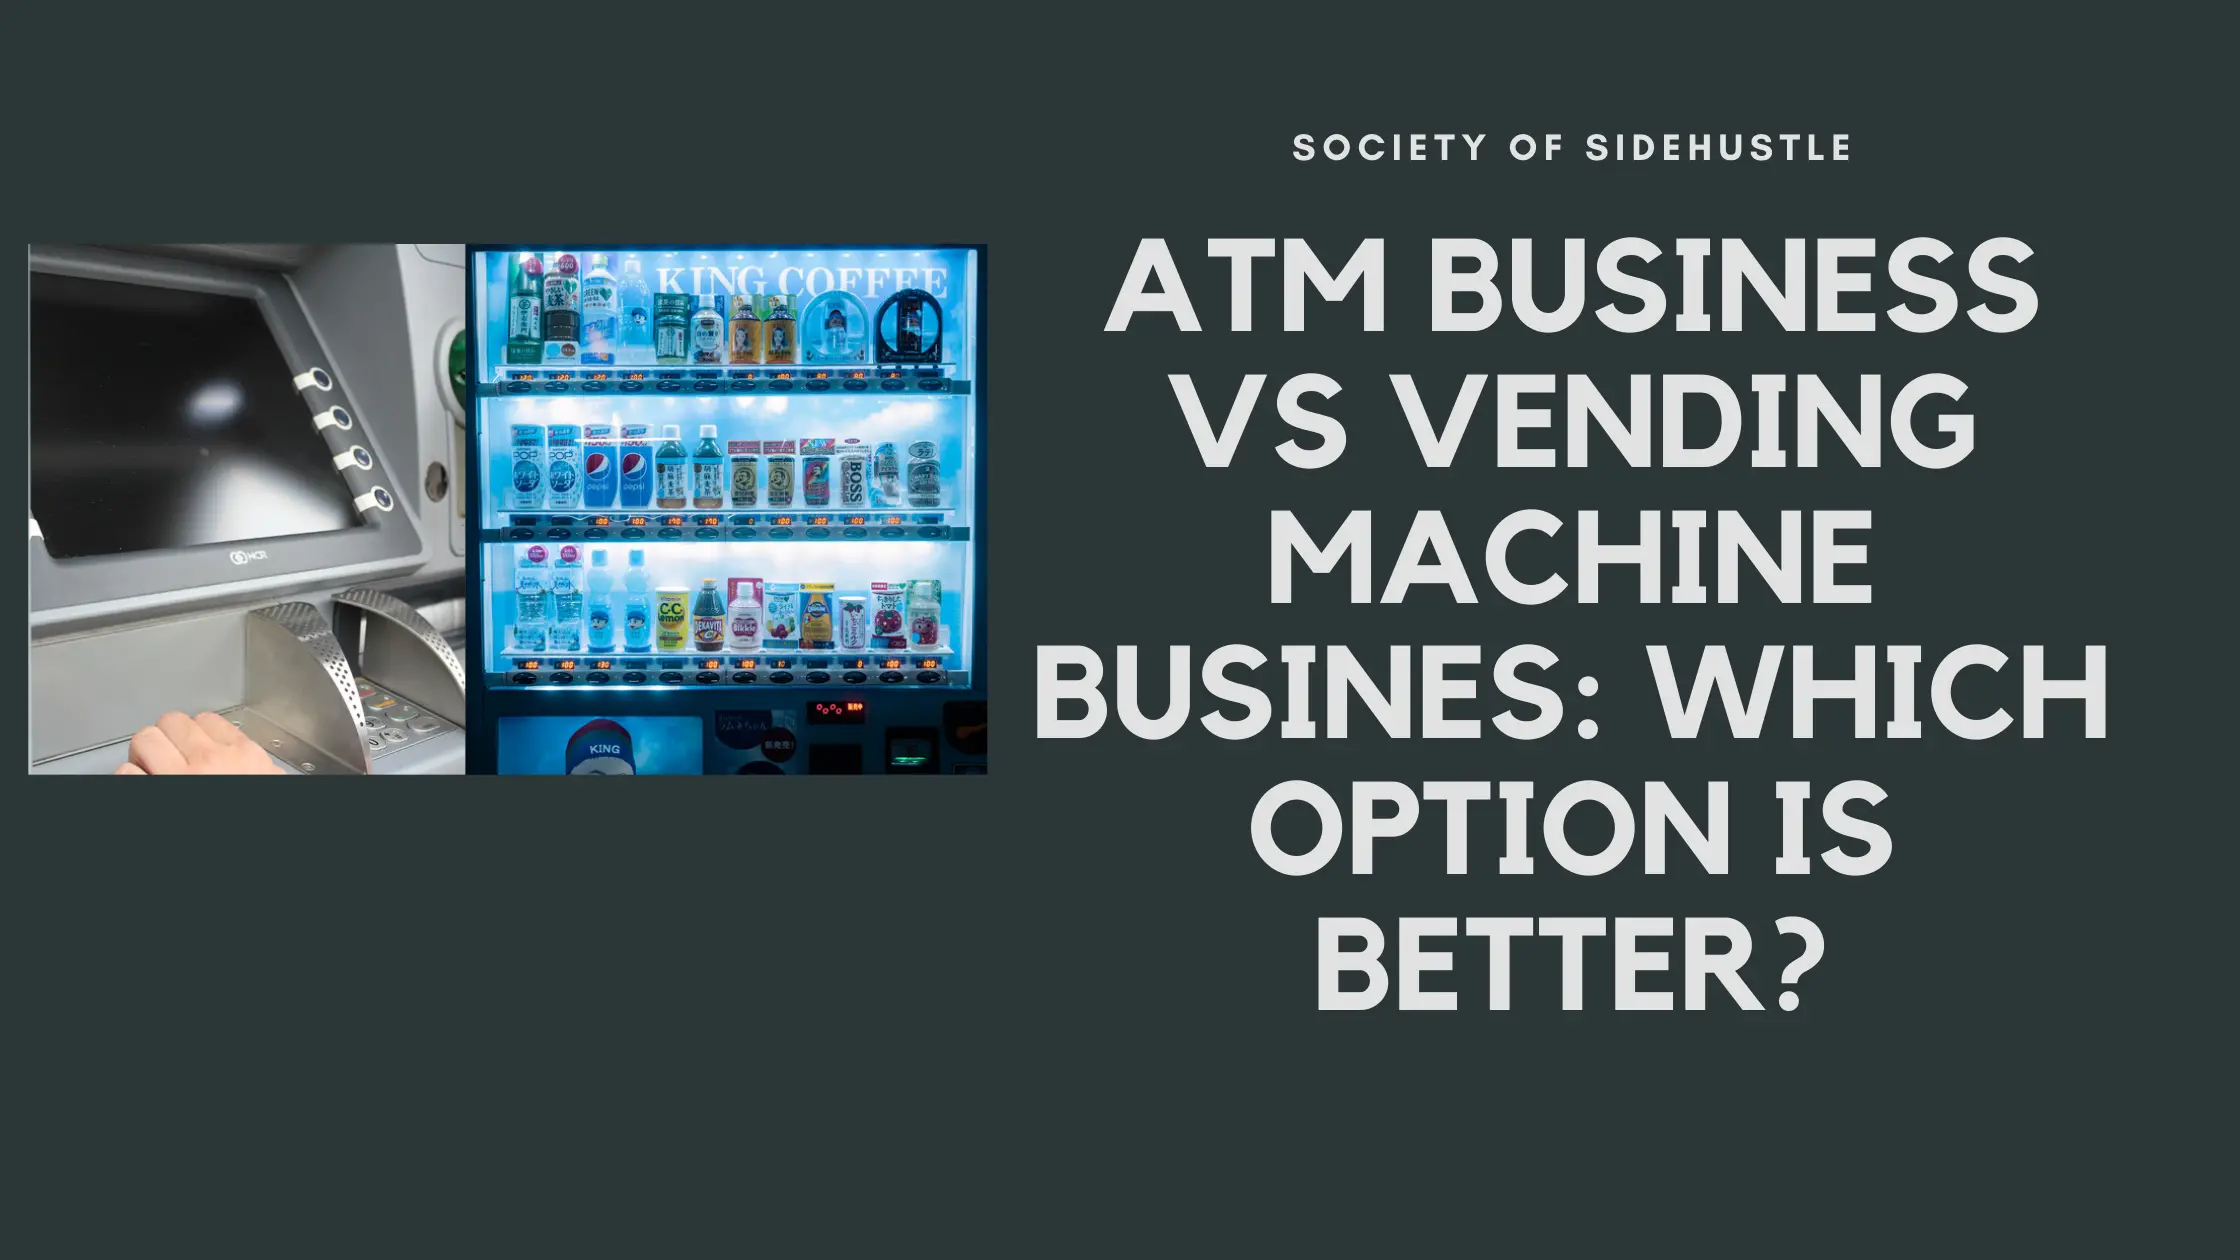 Vending Machine Business vs ATM: Which Option is Best?